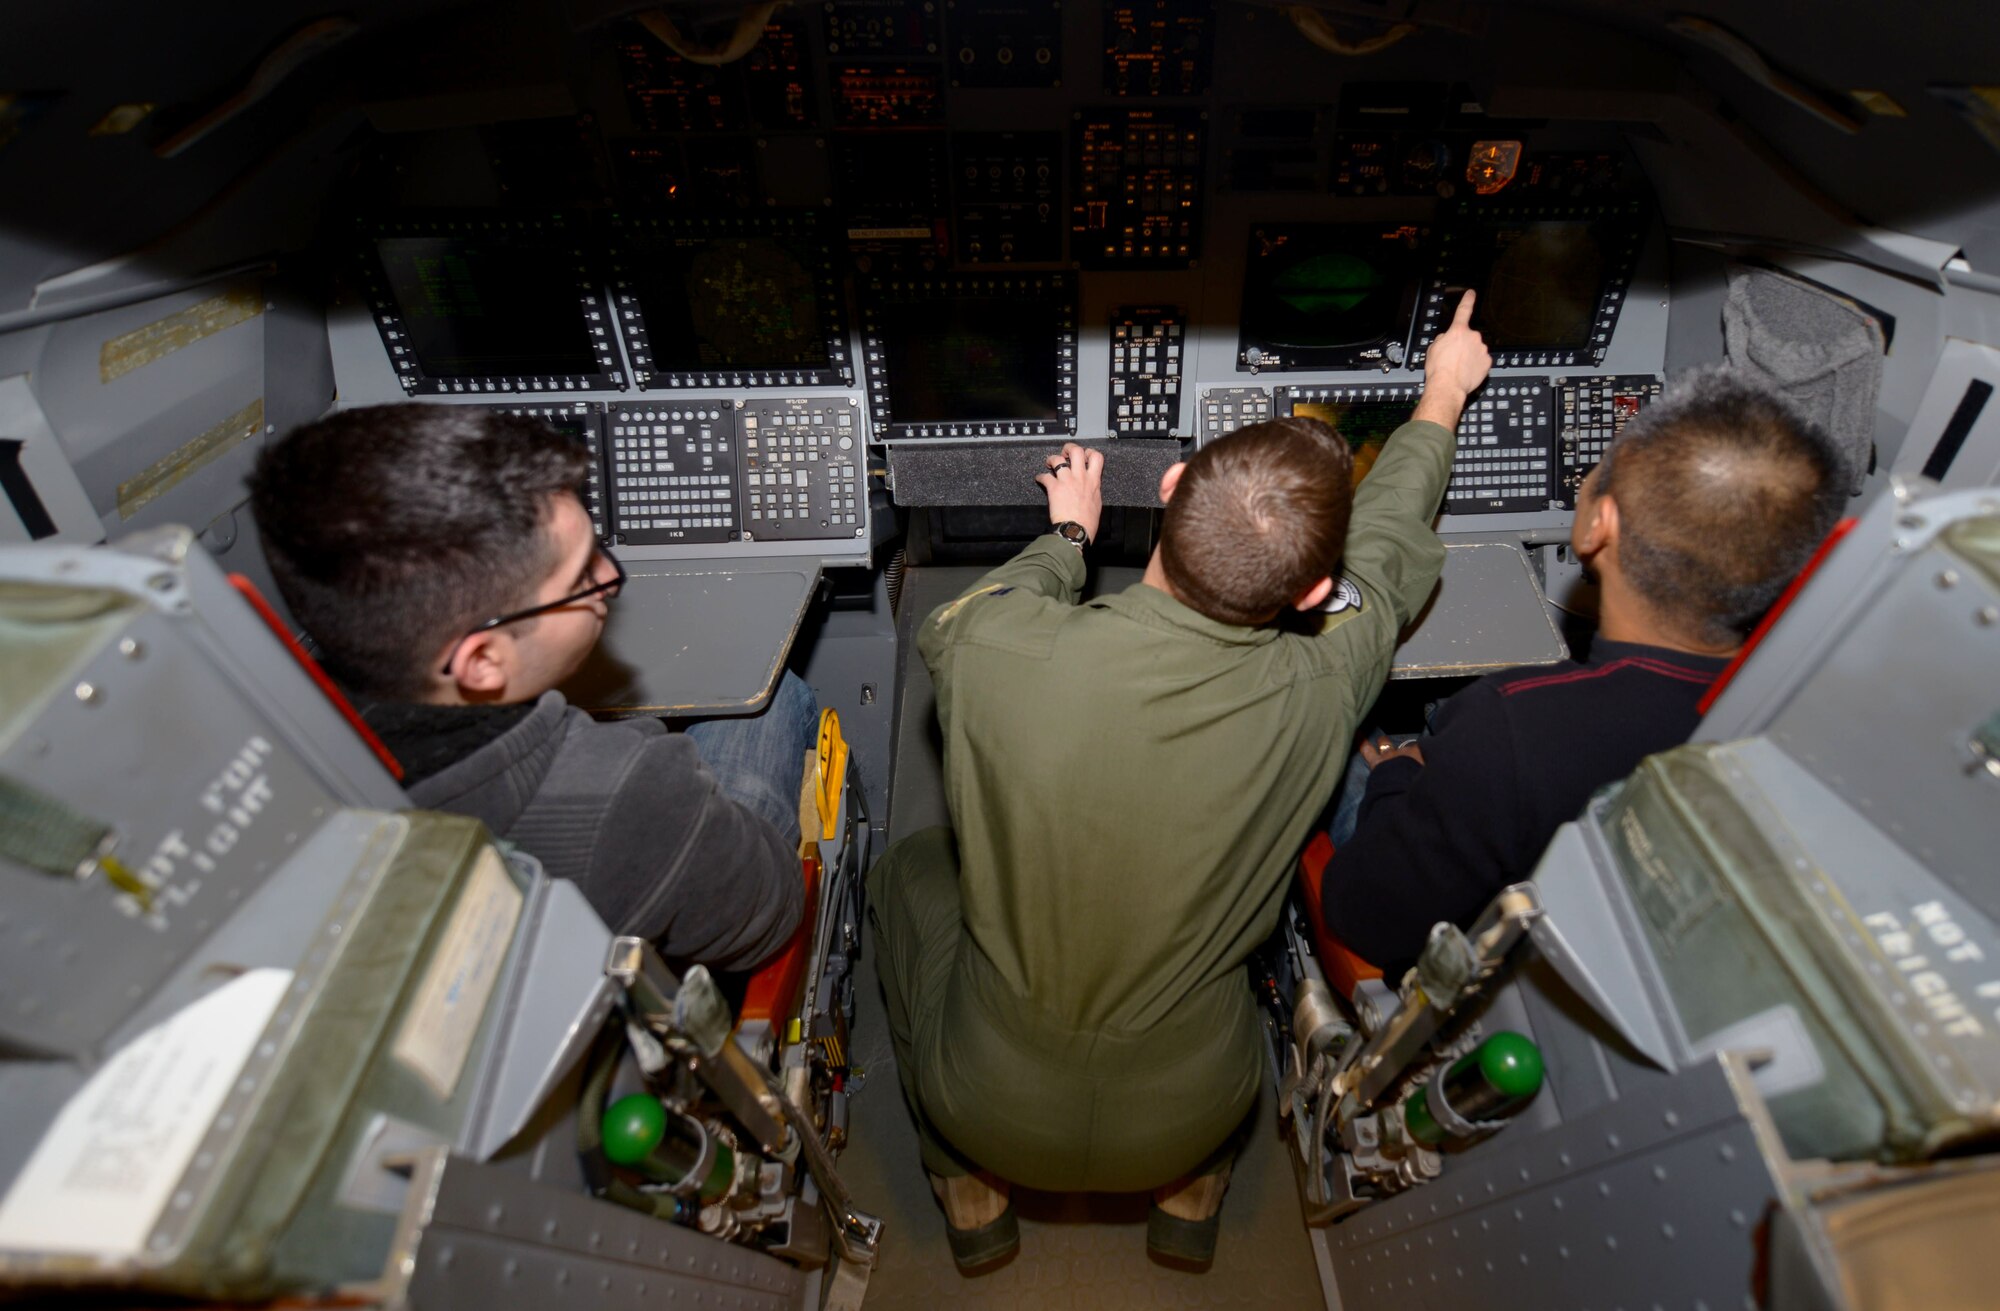 Tech. Sgt. Roderick Marquez, a logistics non-commissioned officer in charge assigned to the 28th Civil Engineer Squadron, and Shawn Horton, a client systems technician assigned to the 28th Munitions Squadron, join Capt. Anthony Bunker, a weapon systems officer assigned to the 34th Bomb Squadron, in a B-1 simulator in Ellsworth Air Force Base, S.D., Dec. 20, 2016. The 28th Operations Support Squadron hosted B-1 simulator tours for a few days allowing military members and their families a chance to “fly” the BONE. (U.S. Air Force photo by Airman 1st Class Donald C. Knechtel)